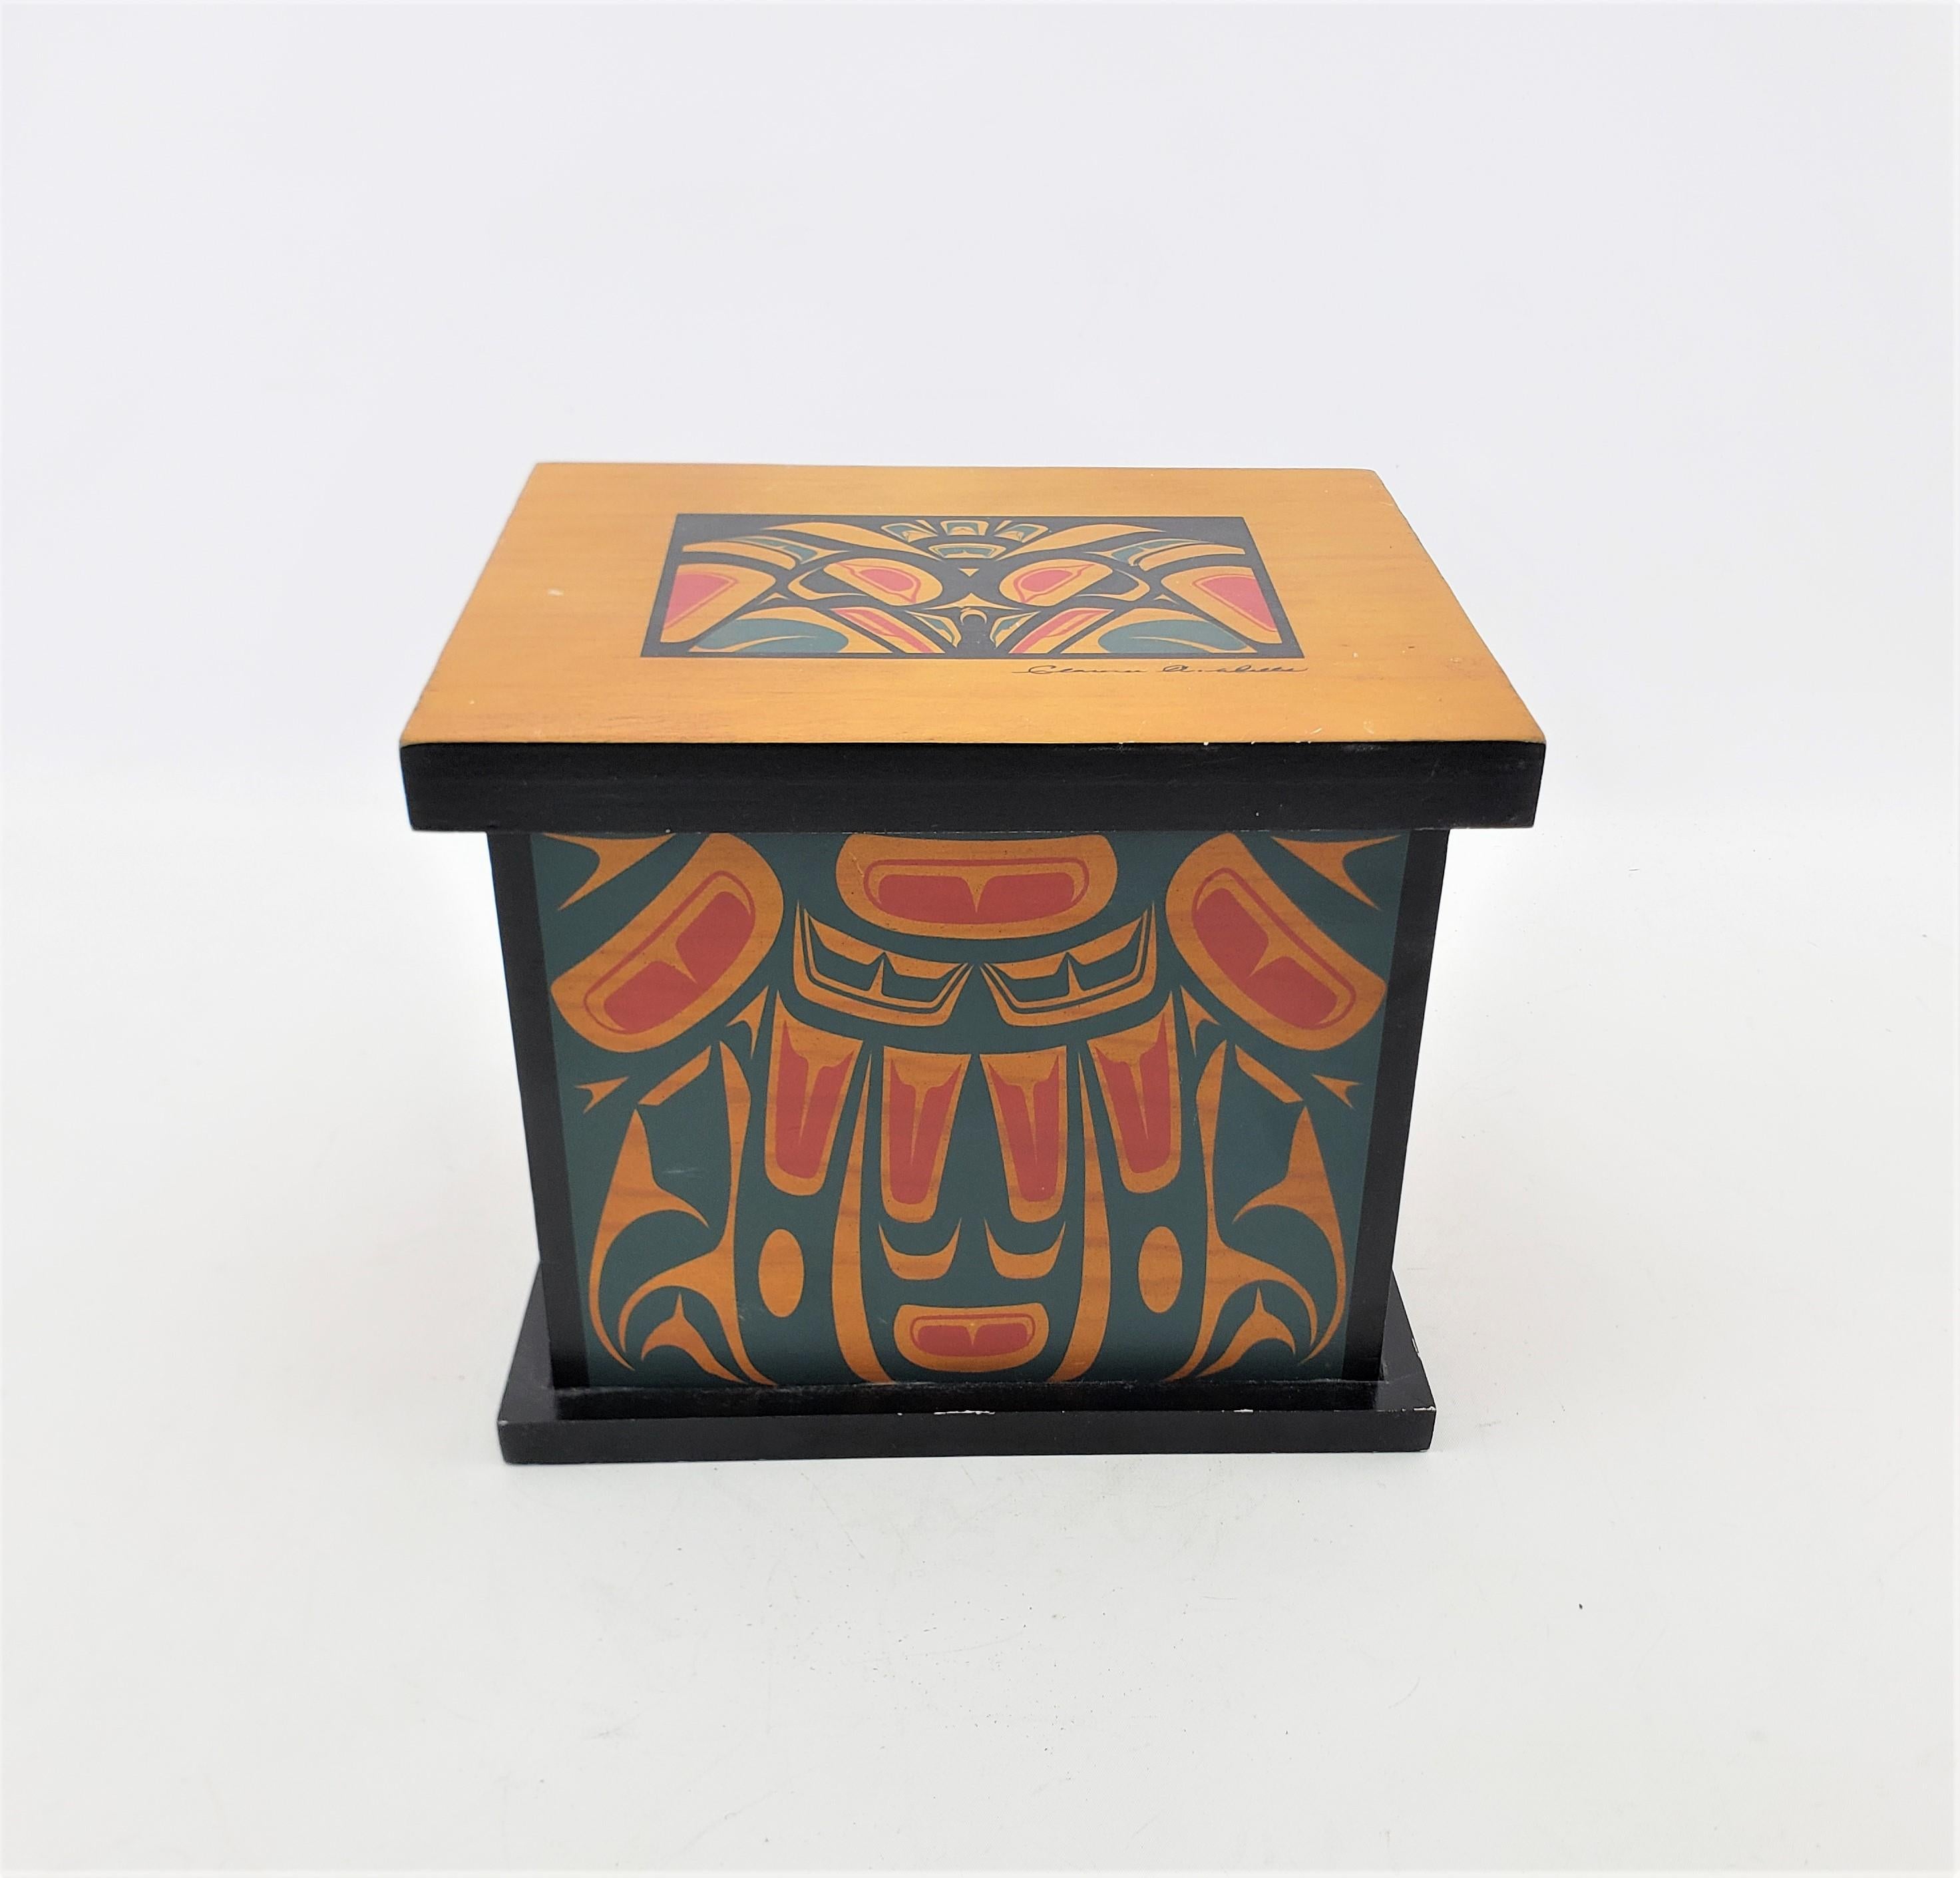 This decorative wooden box was designed by Clarence Wells of Canada and dates to approximately 1970 and done in the West Coast Haida style. The box is has silkscreened decoration on all four sides in muted tones of blue, and red with black accents.